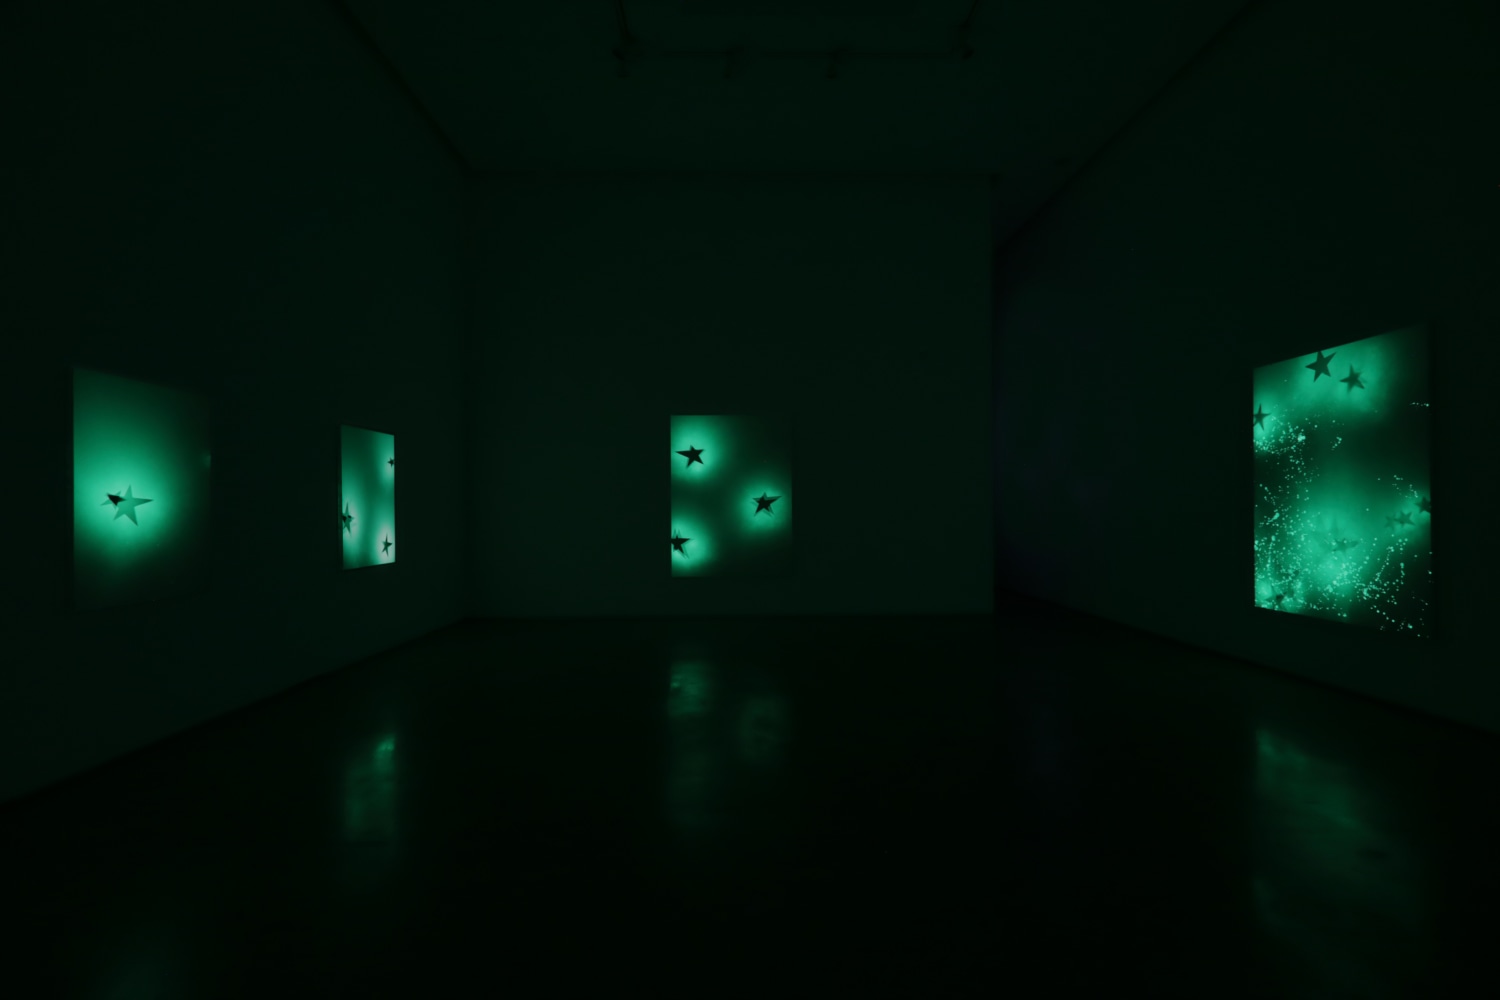 Installation view of&amp;nbsp;Koo Jeong A:2O2O&amp;nbsp;at PKM, Seoul, 2020

Courtesy of the artist &amp;amp;&amp;nbsp;PKM Gallery